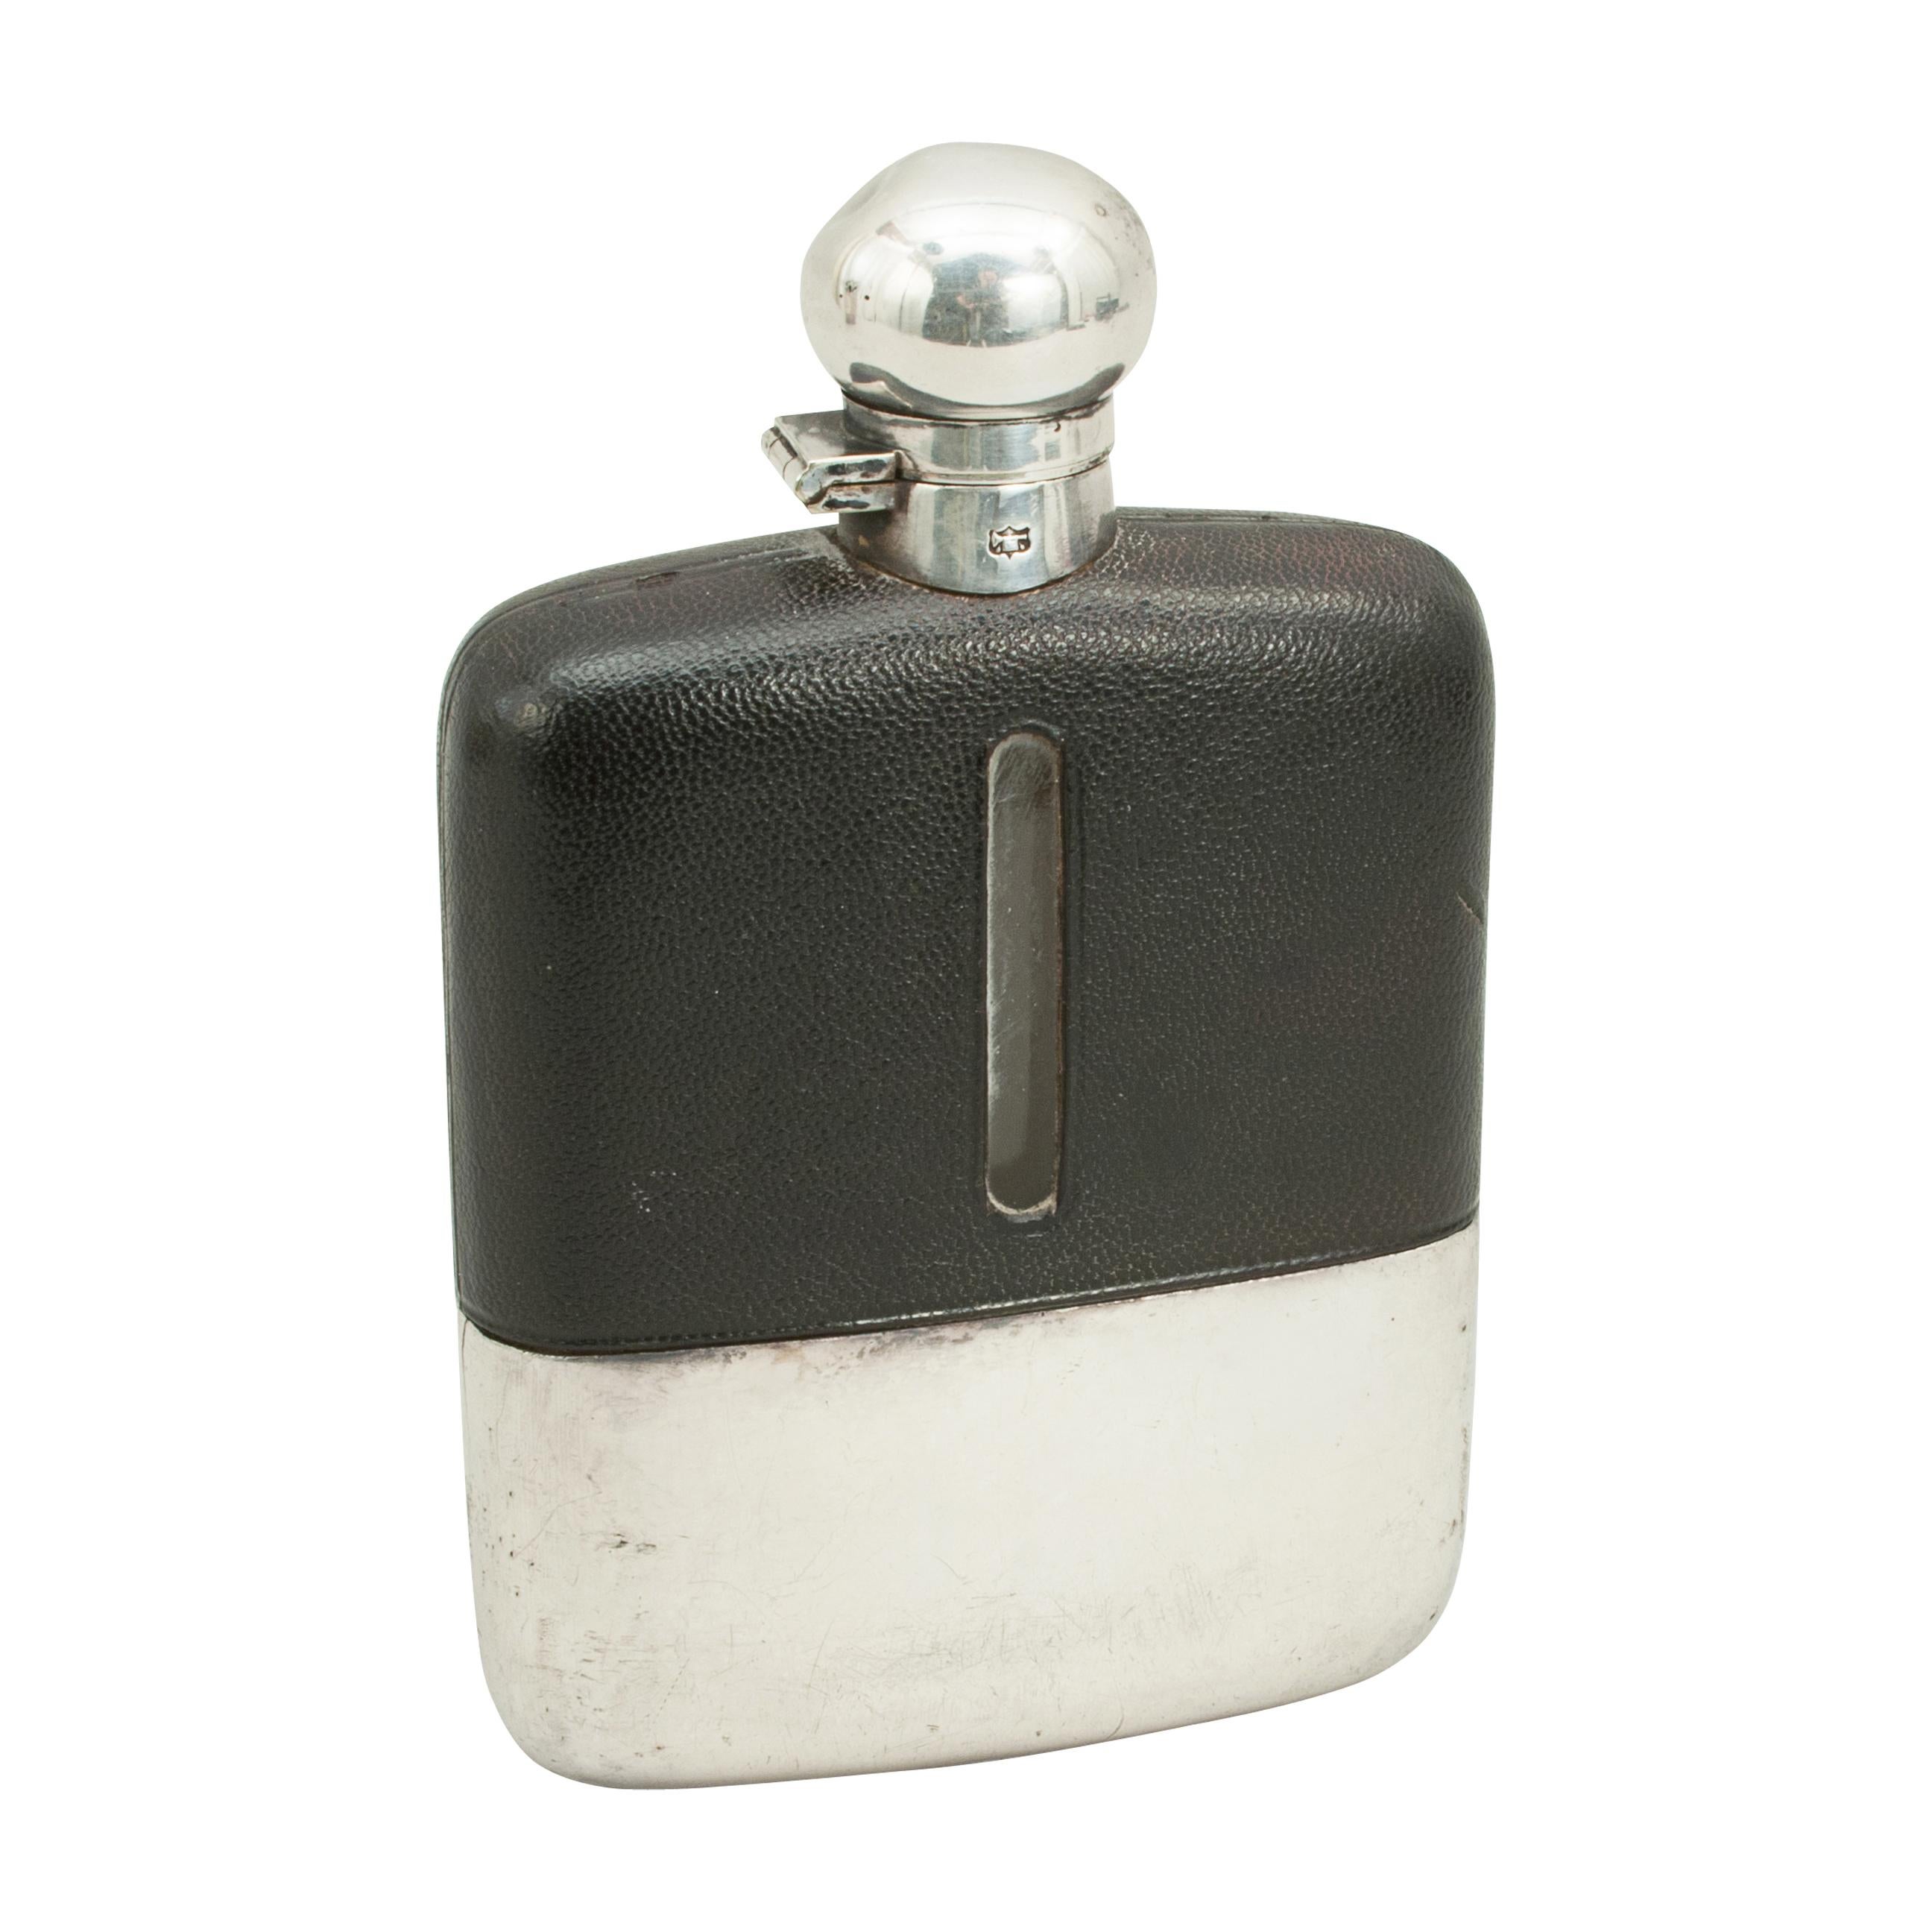 James Dixon's Silver Plated Gentleman's Hip Flask with Leather Cover